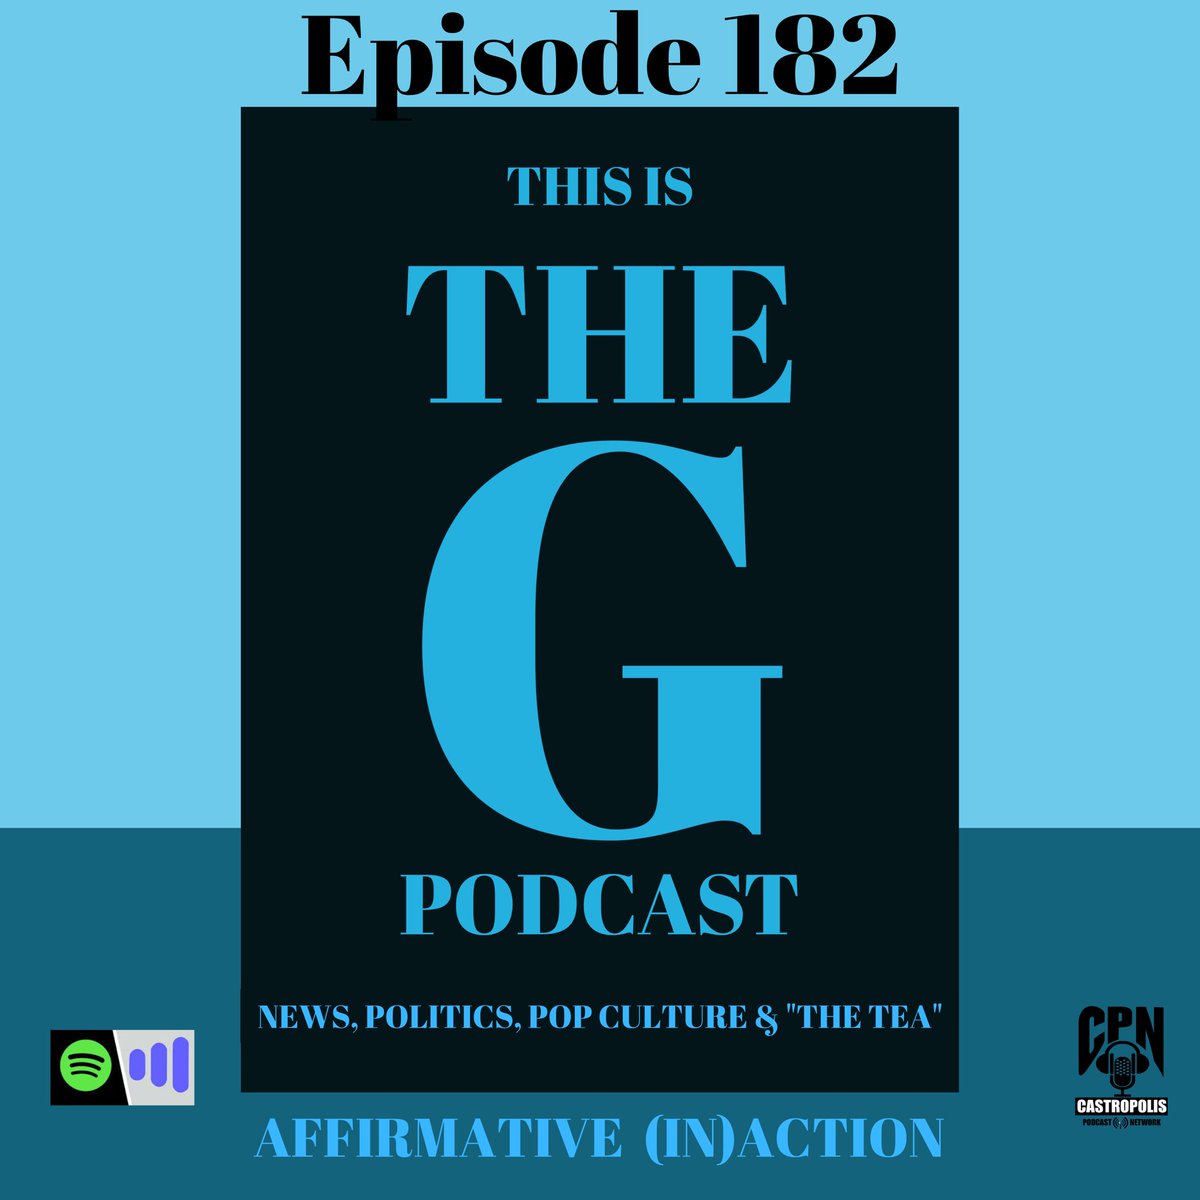 New Episode
. 
Episode 182
Affirmative (In)Action
.
Links in Bio @thisisthegpodcast 
Castropolis.net 
.
#blacktalk #blackradio #atlantaradio #castropolispodcastnetwork #blackpodcast #podcast #atlantapodcast #newsandpolitics #entertainment #popculture